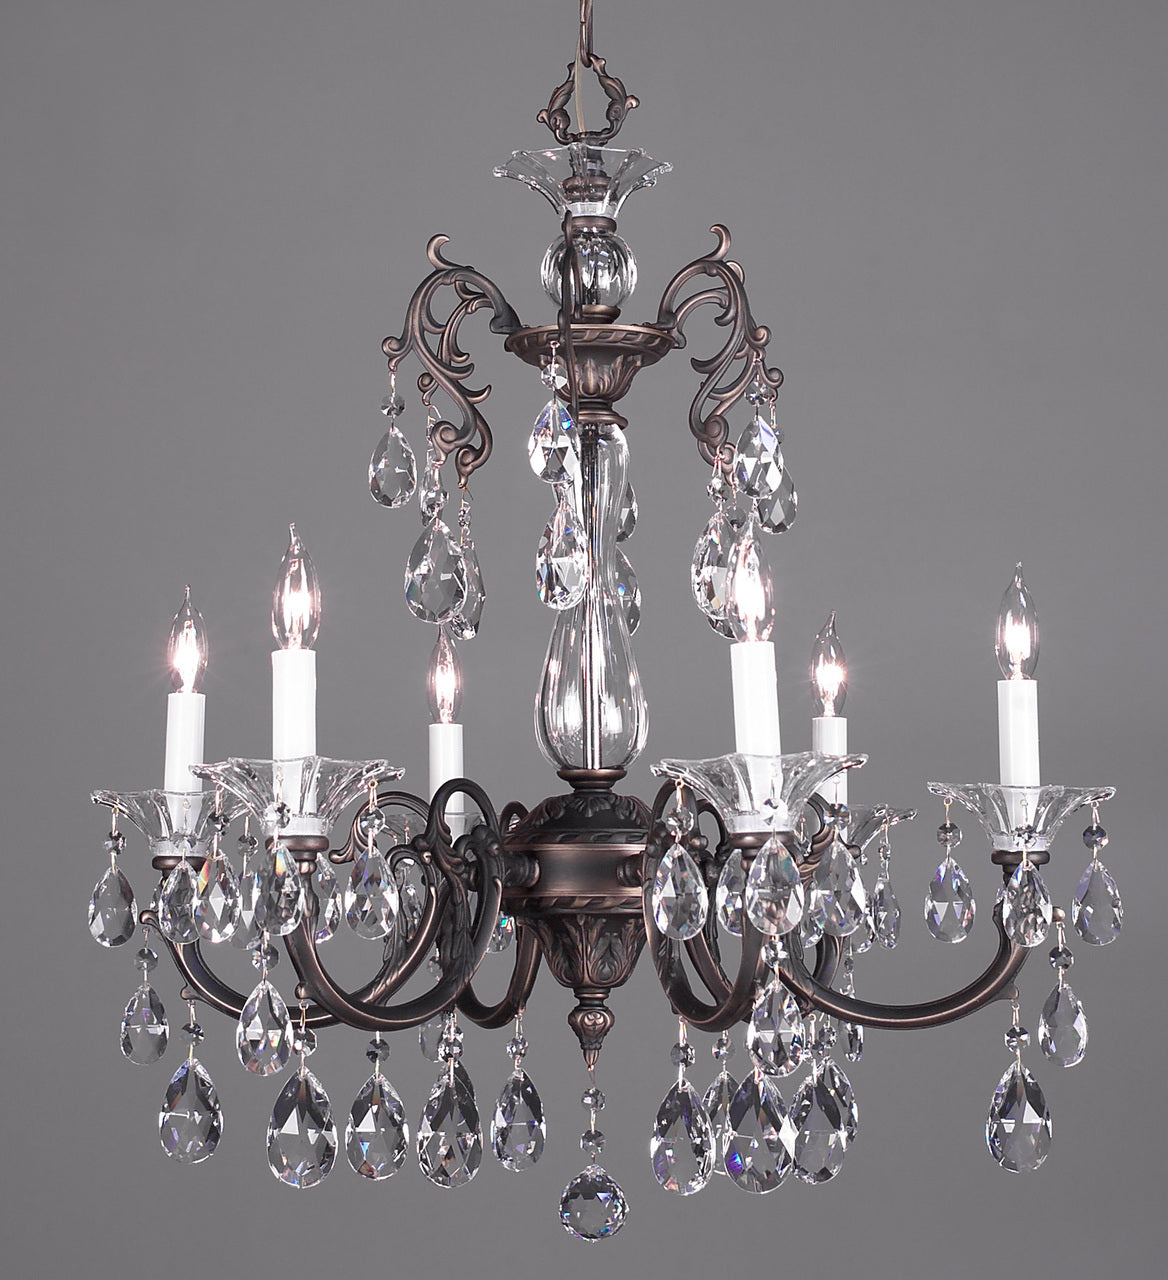 Classic Lighting 57056 RB CBK Via Lombardi Crystal Chandelier in Roman Bronze (Imported from Spain)